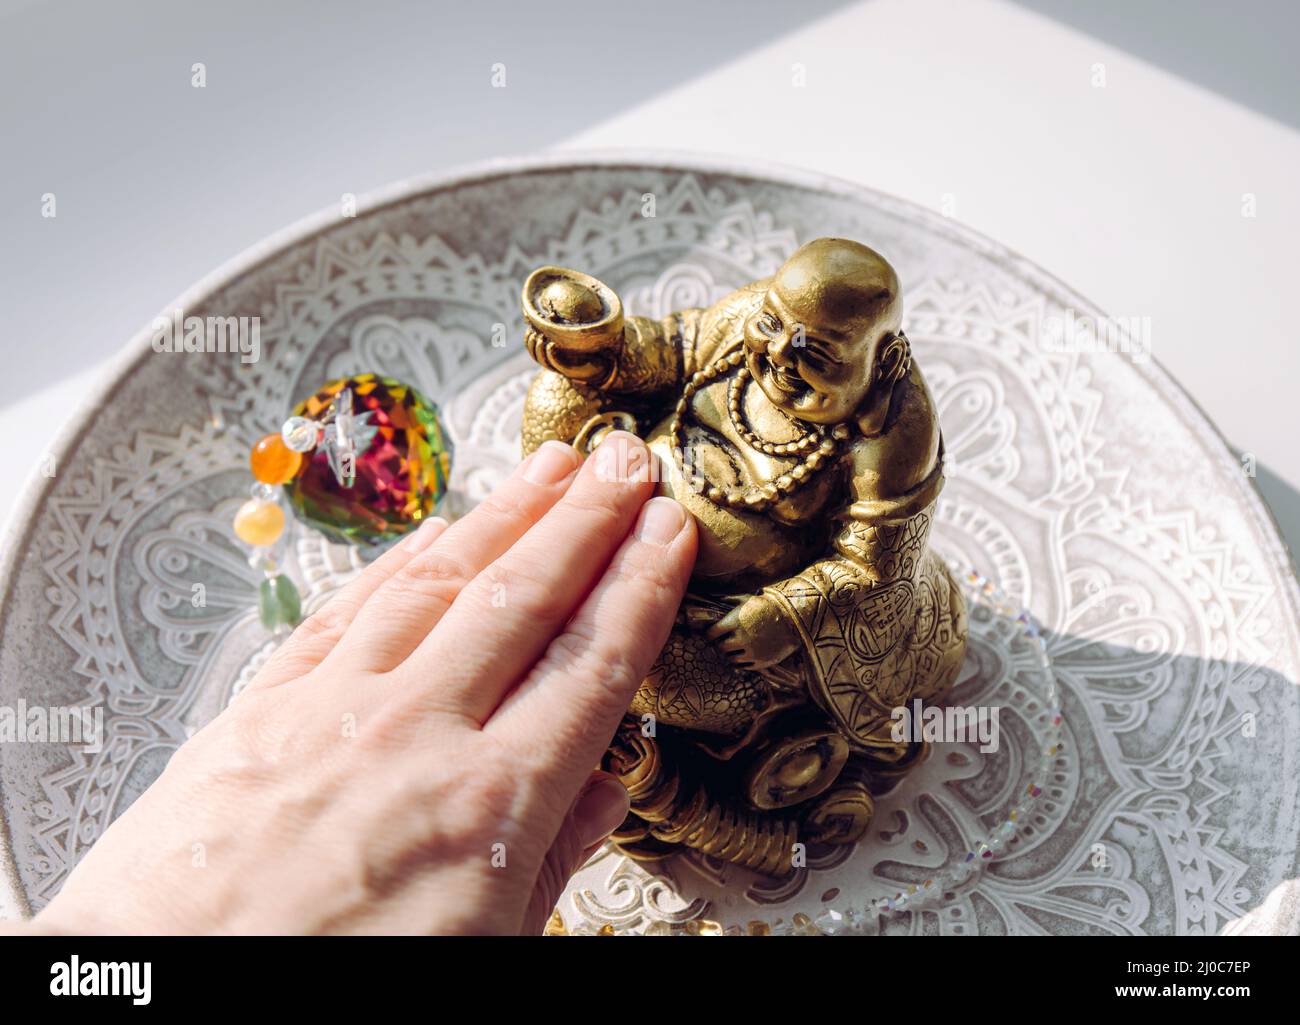 Person hand rubbing small golden laughing Buddha figurine tummy. It believed to bring happiness, good fortune and wealth. Buddai monk. Stock Photo